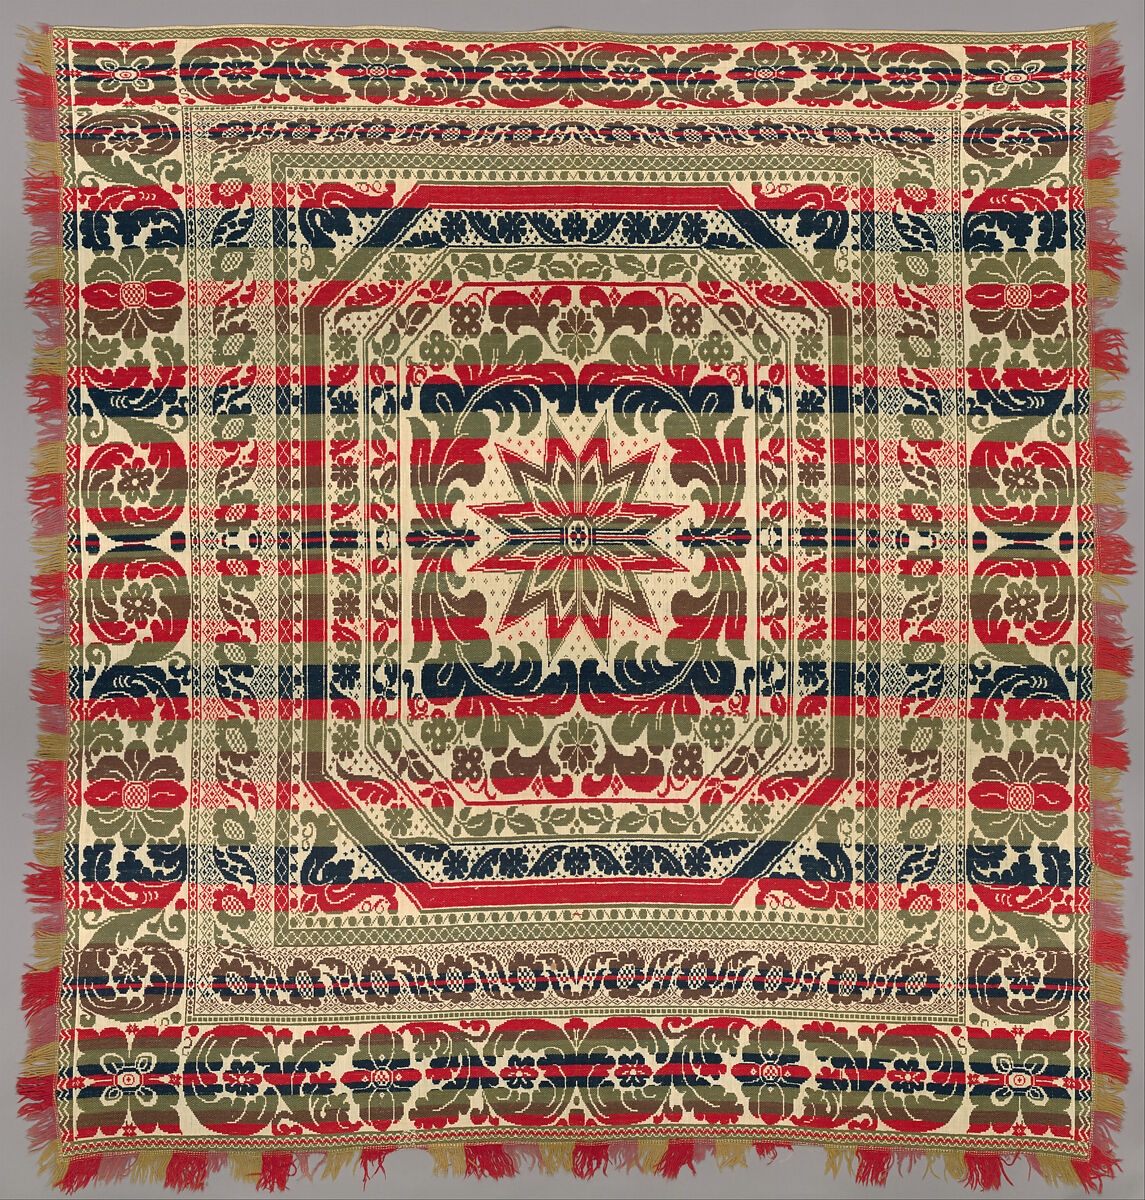 Coverlet, Wool and cotton, Jacquard-loom-woven 